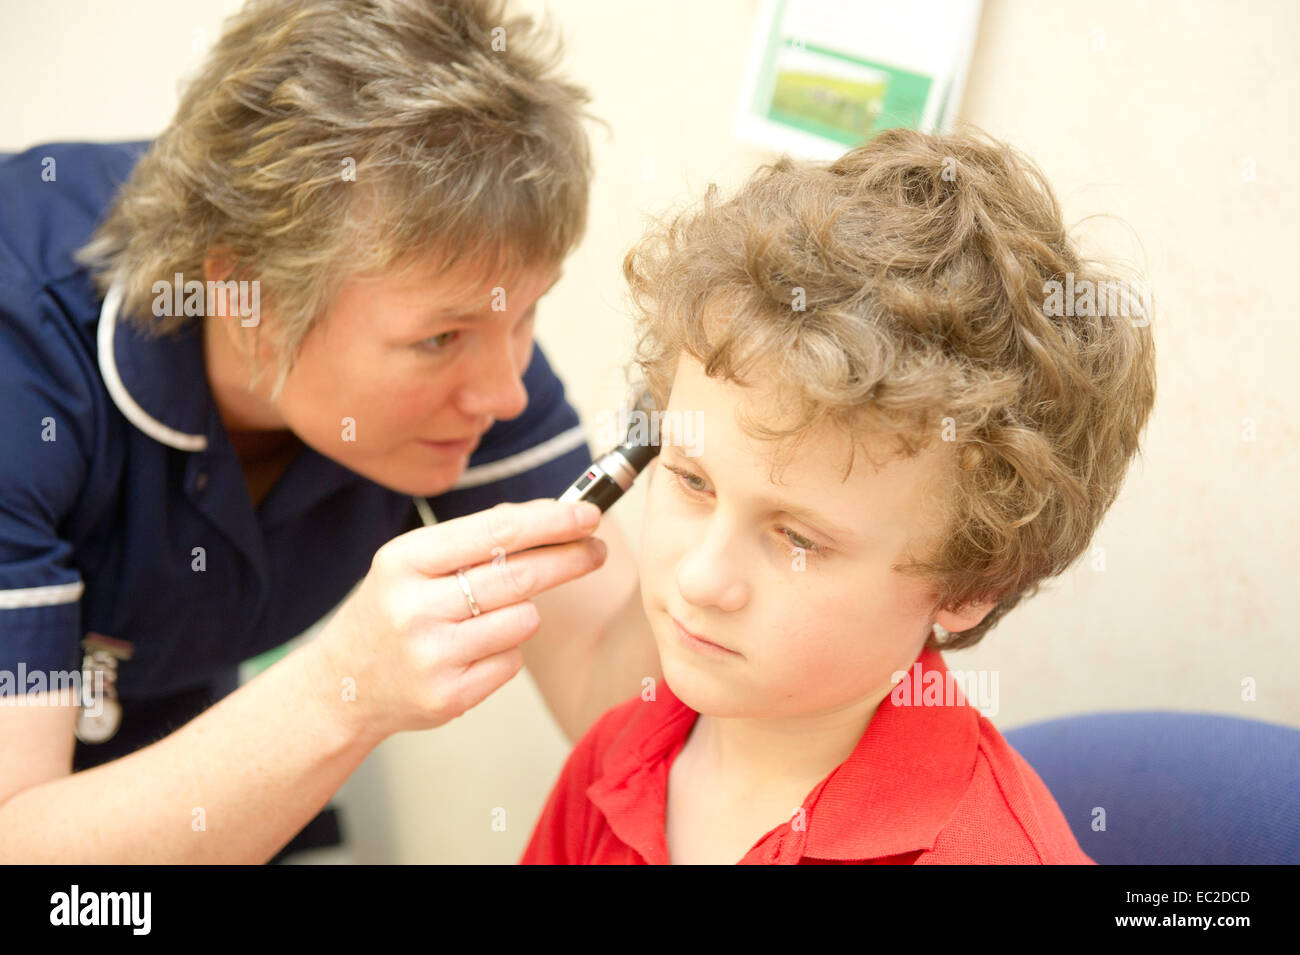 A young boy has his ears examined by a nurse Stock Photo